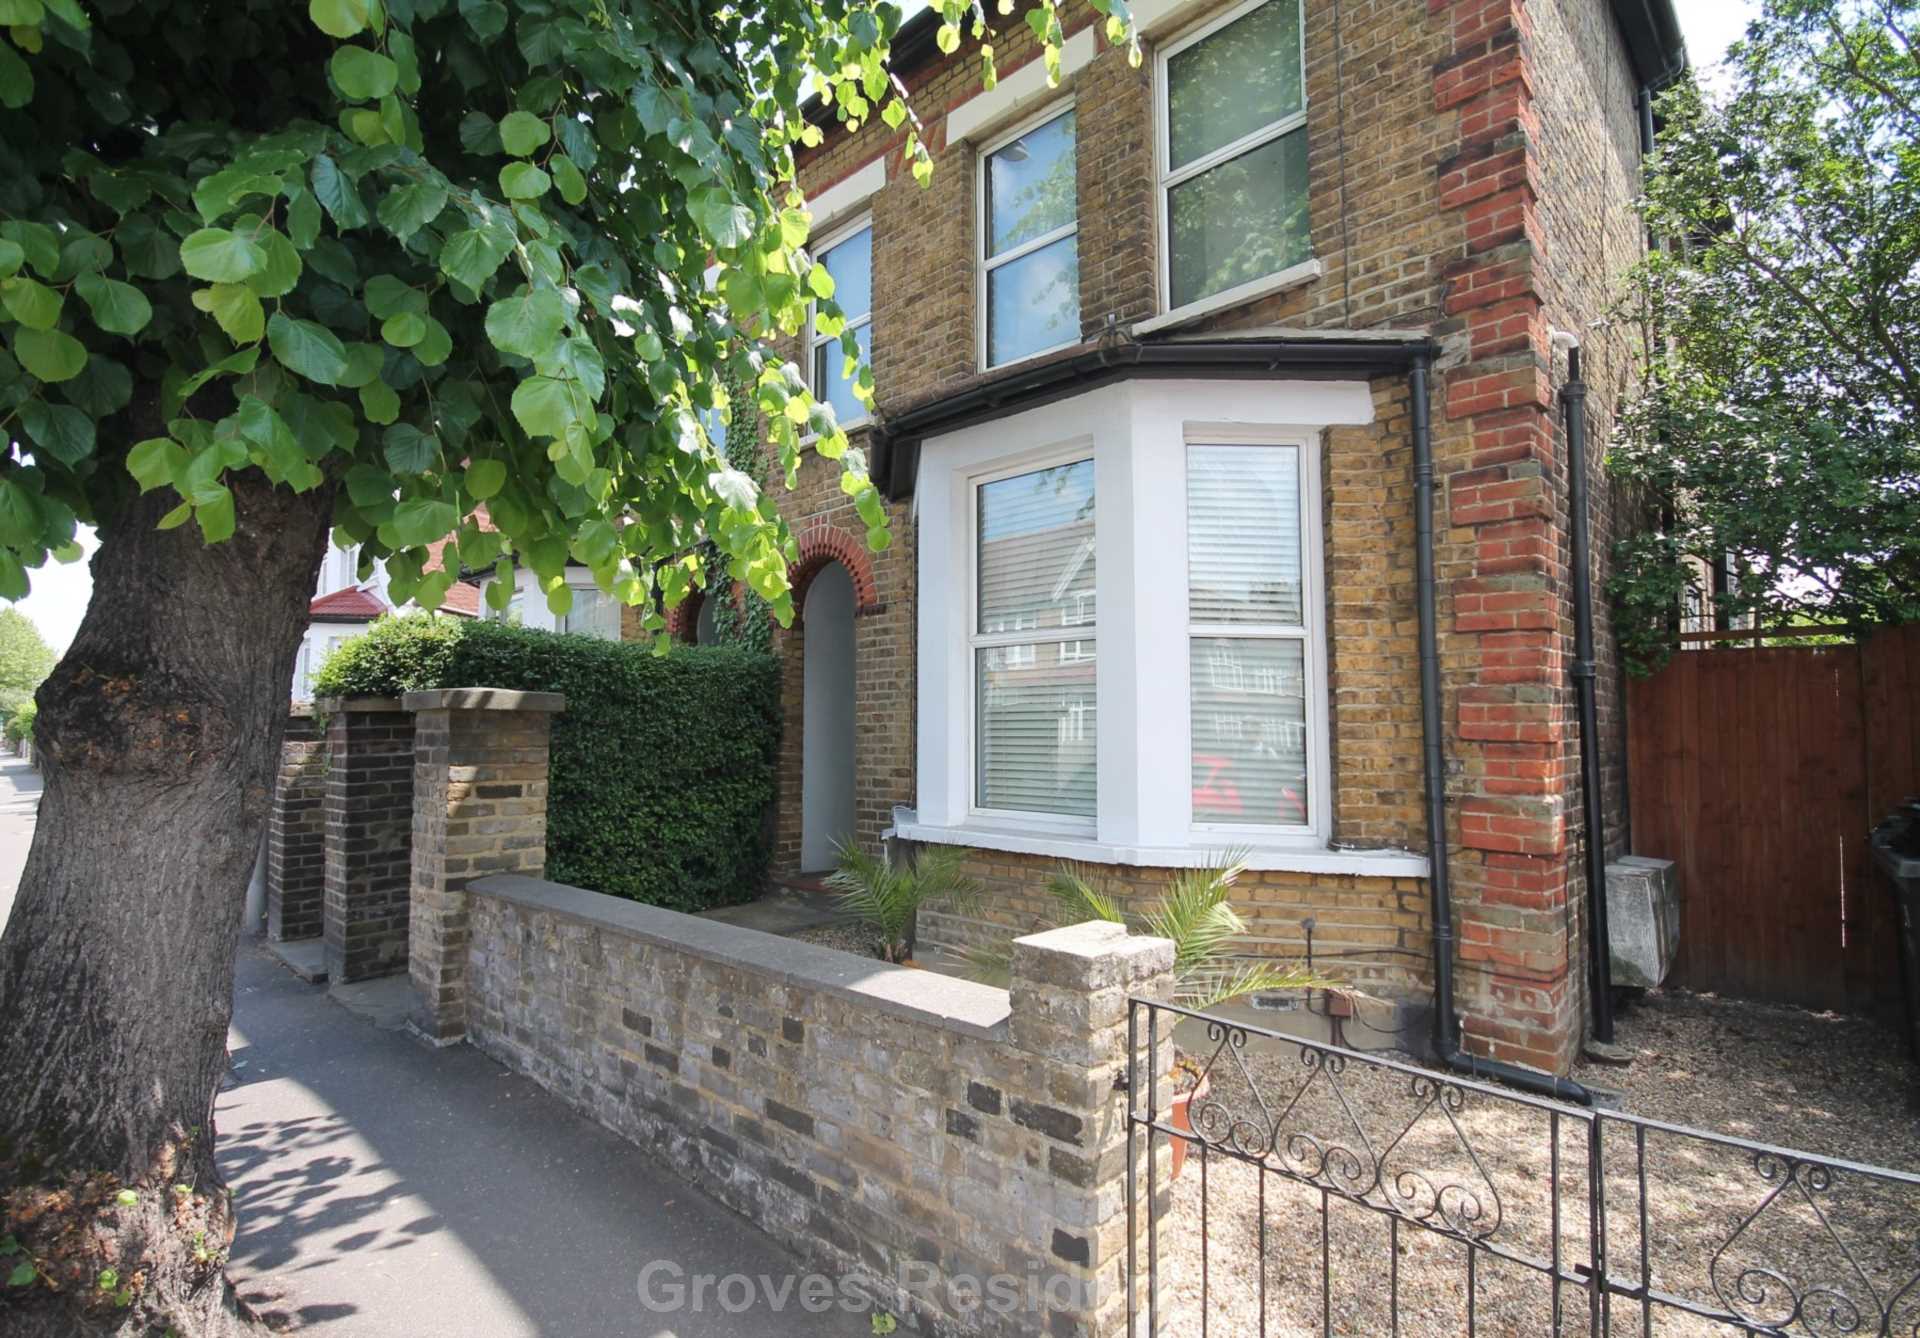 1 bed Flat for rent in New Malden. From Groves Residential